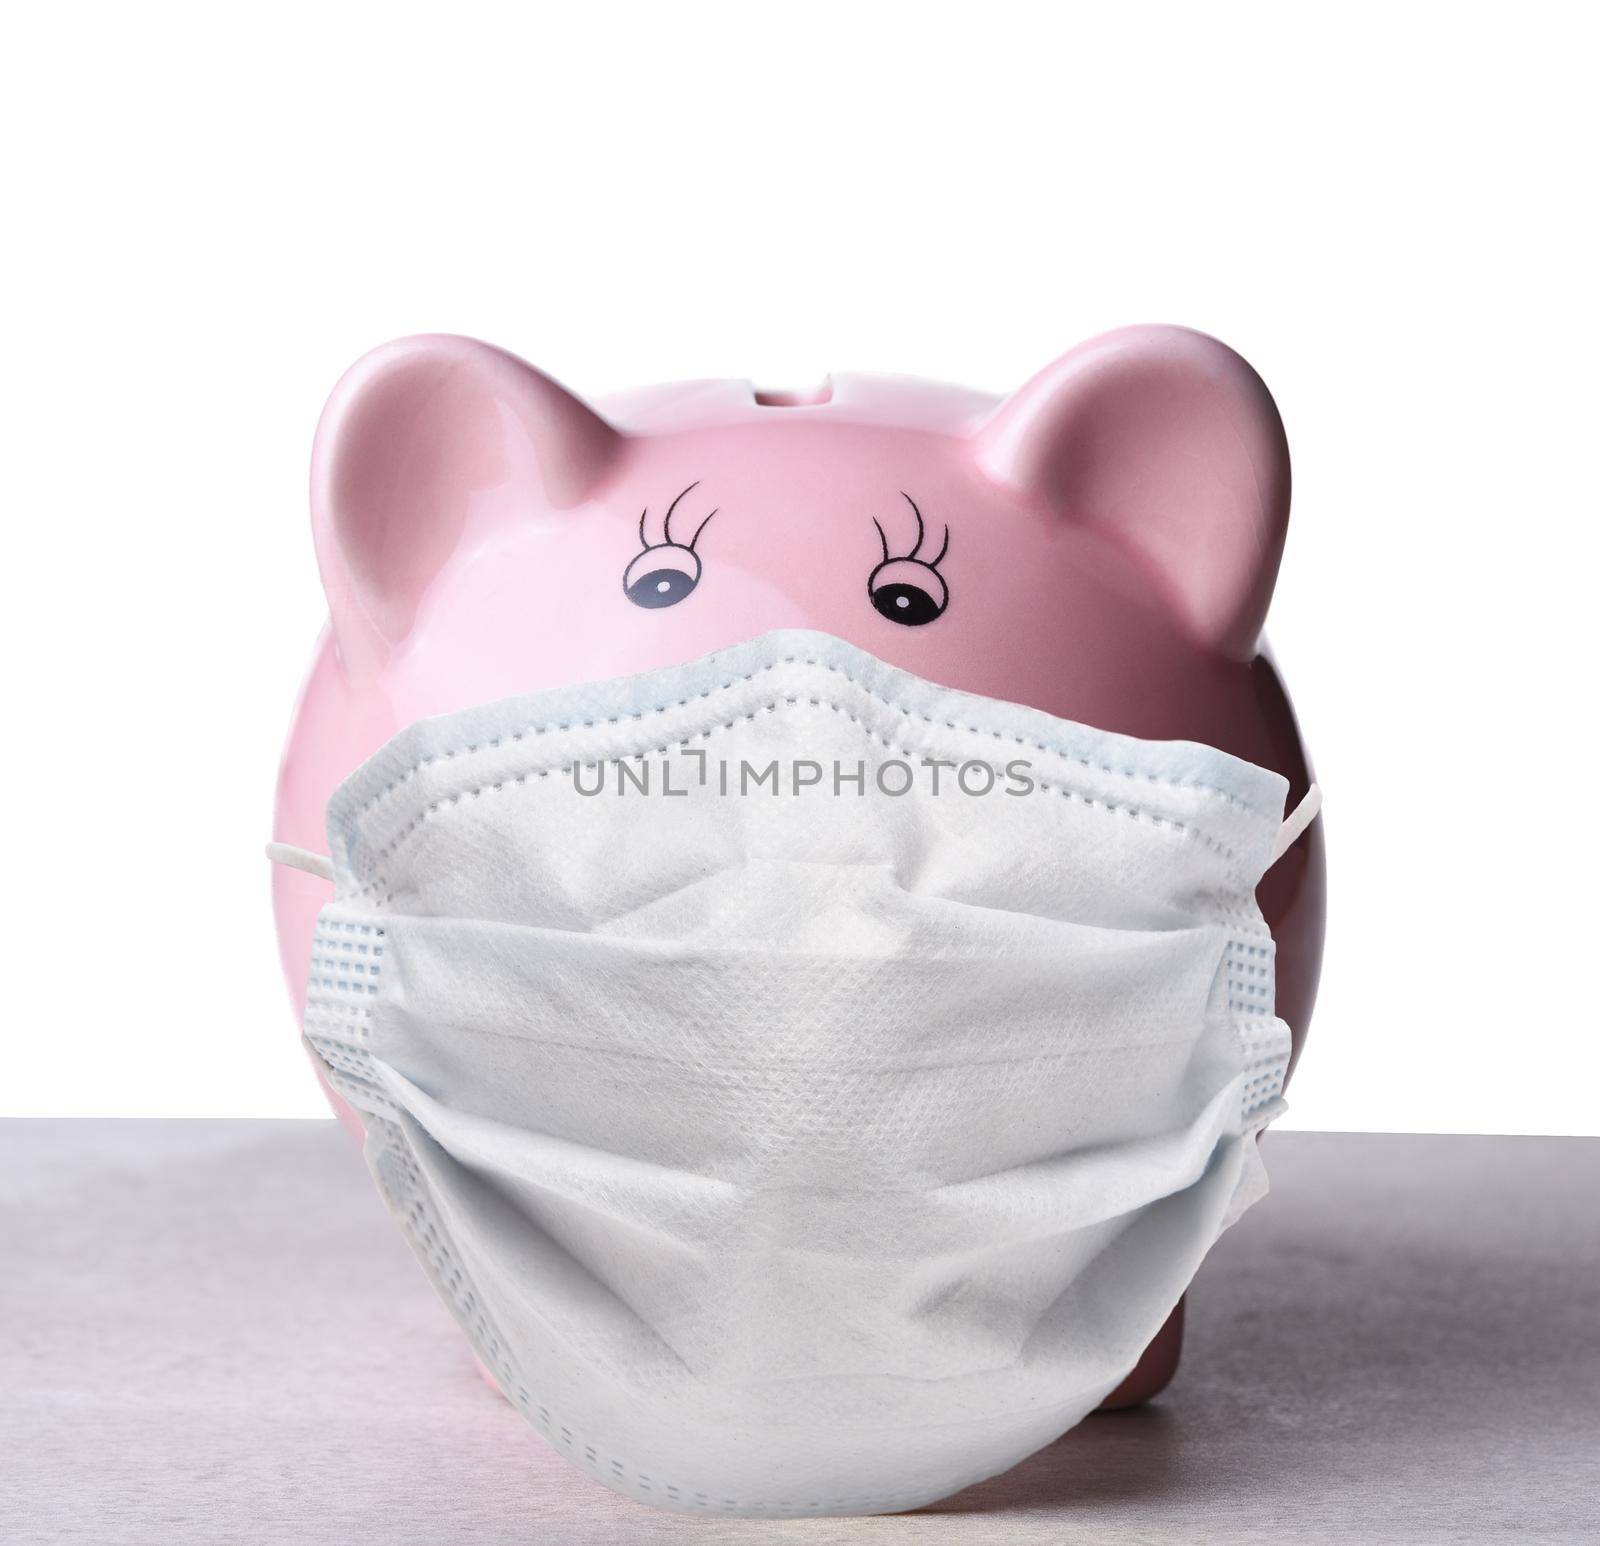 Closeup of a pink piggy bank wearing a COVID-19 surgical mask. by sCukrov